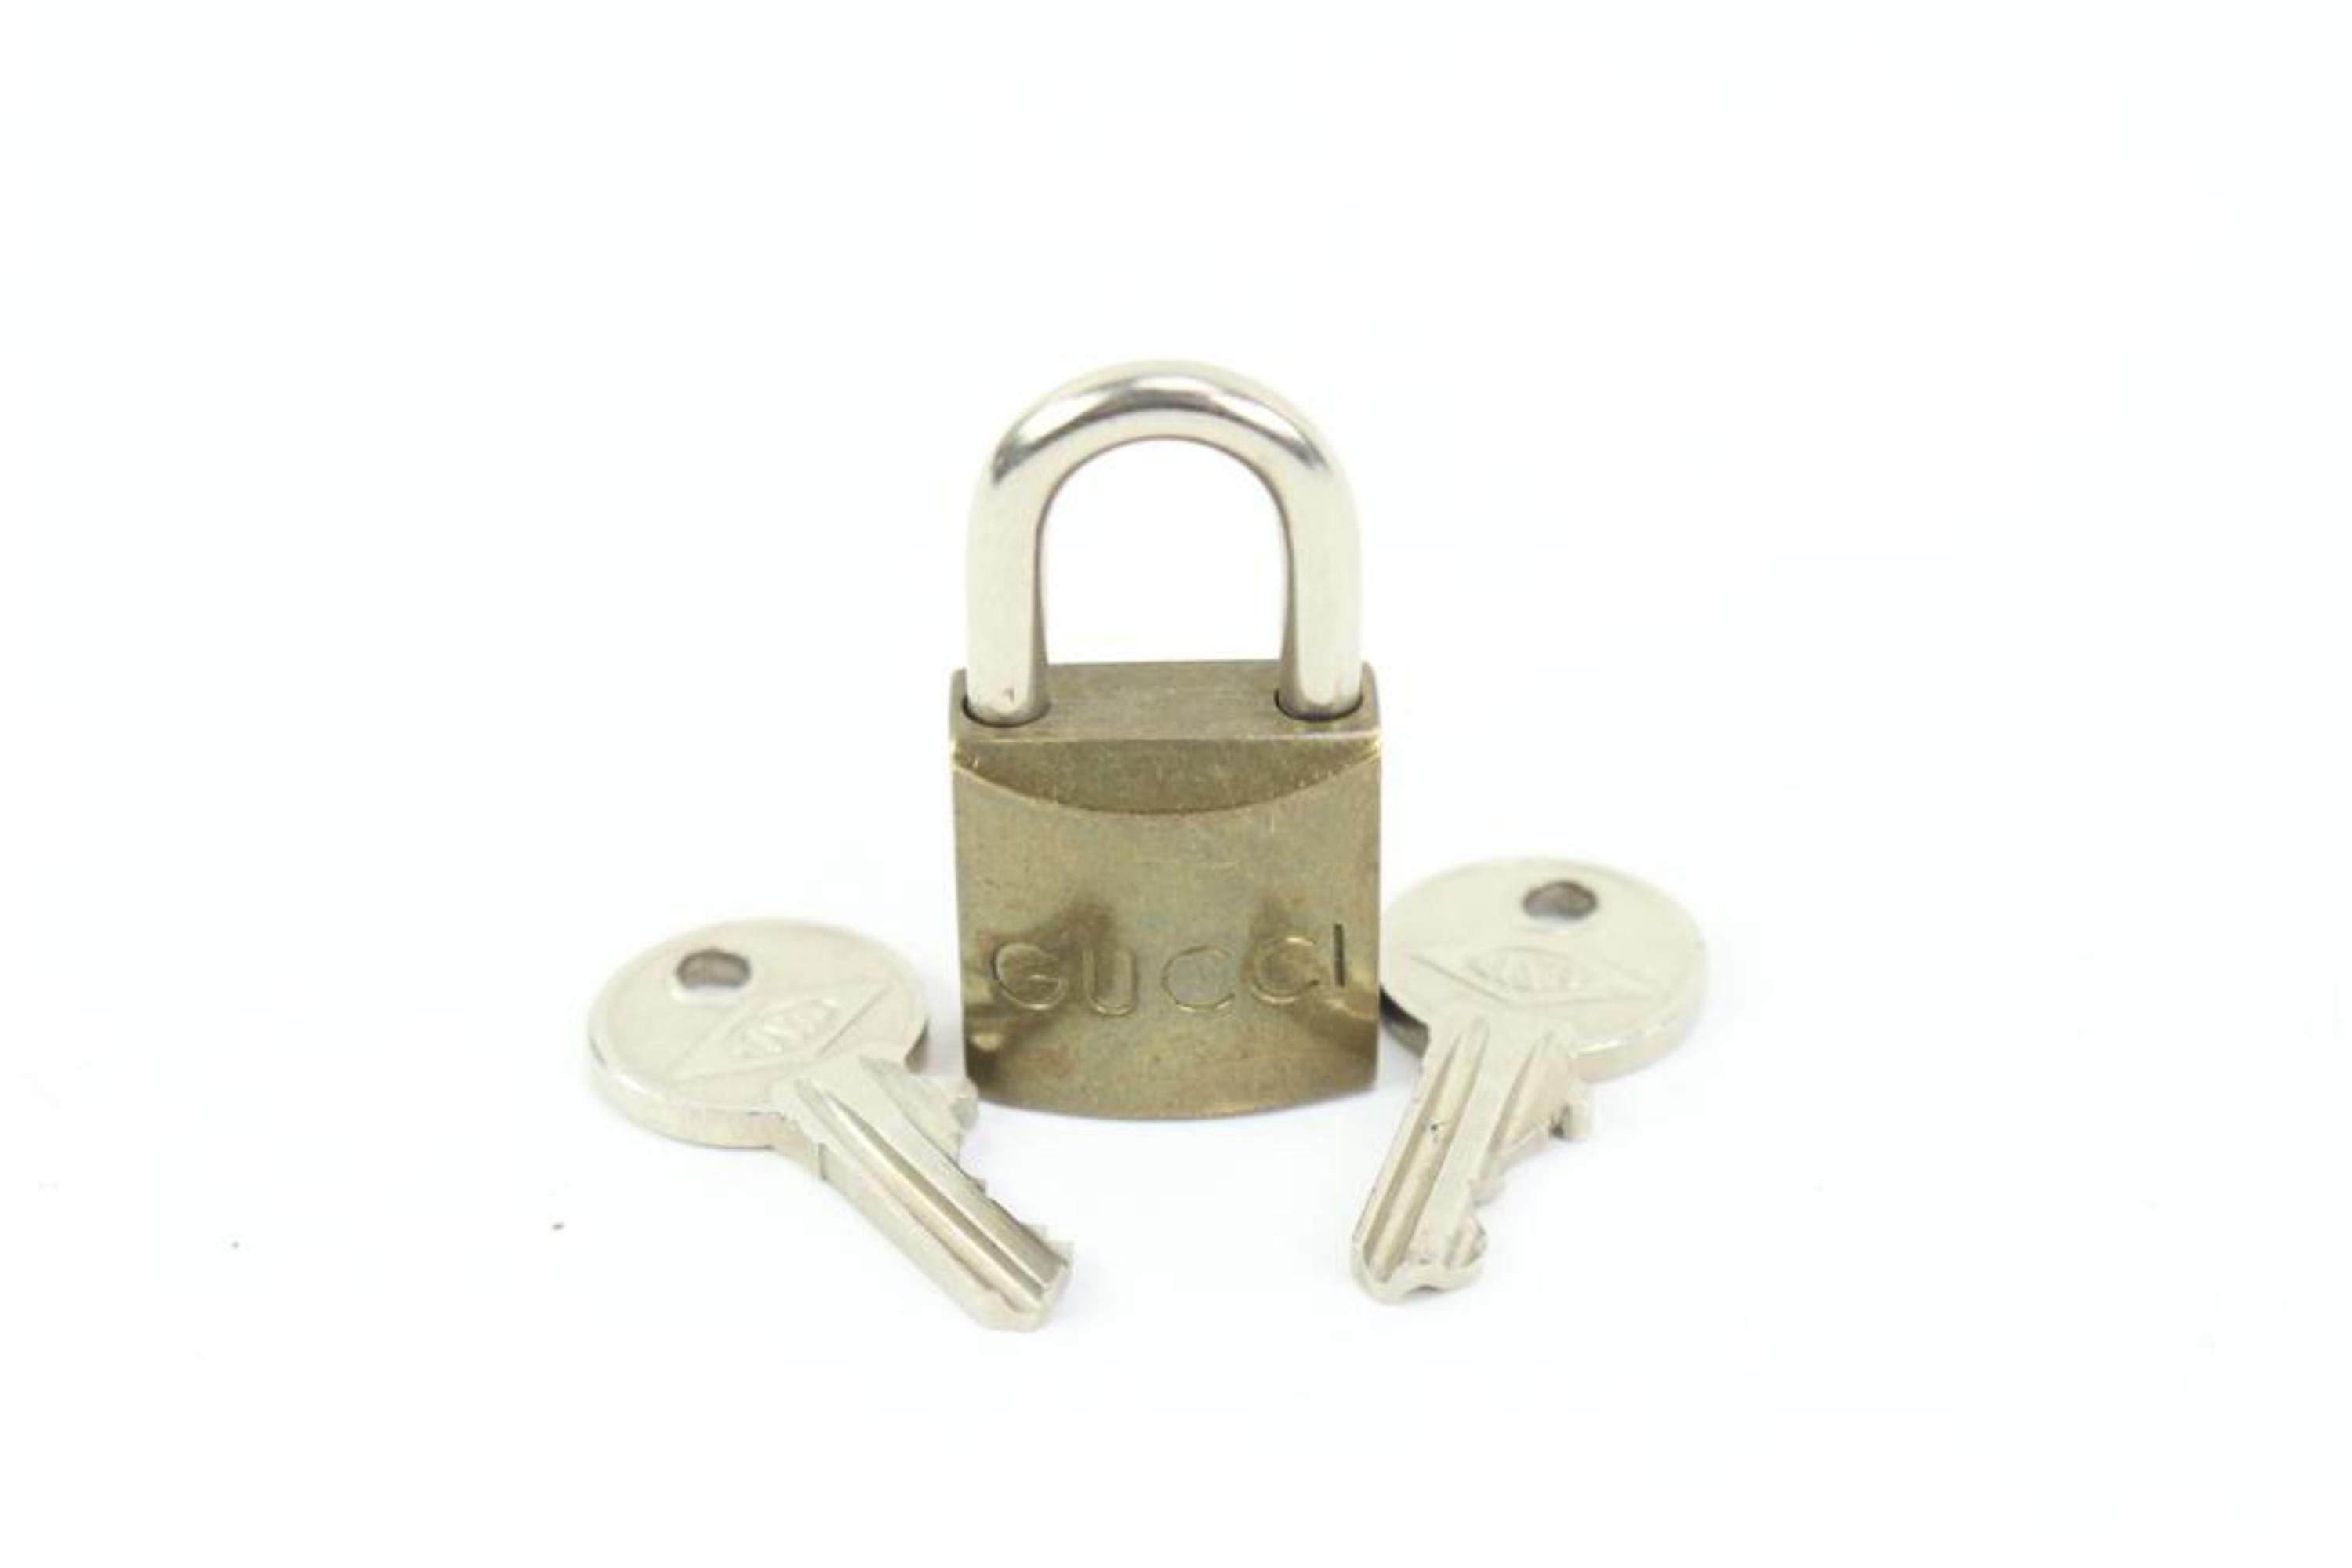 Gucci Brace G Logo Lock and Key Set Cadena Bag Charm Padlock 69g315s In Good Condition In Dix hills, NY